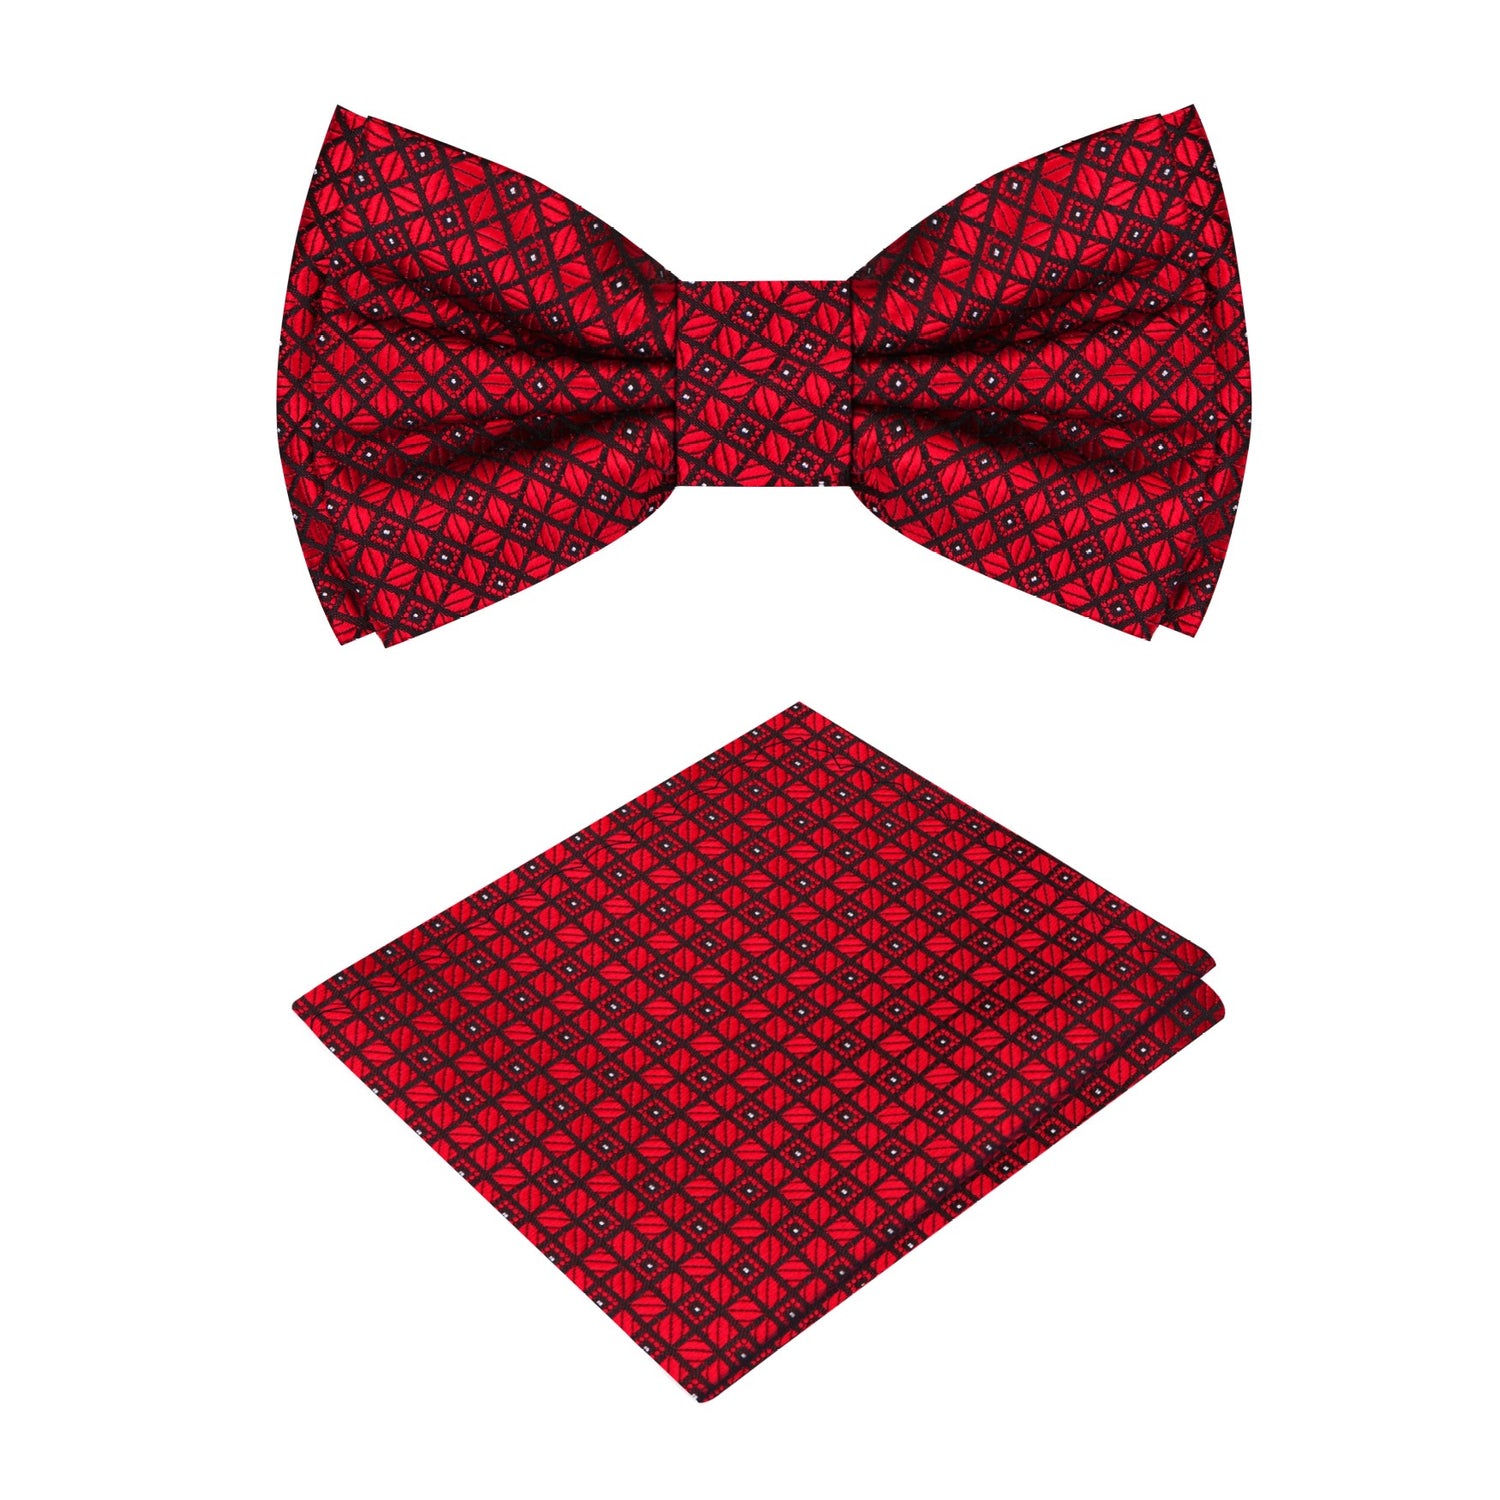 A Burgundy, Black Color With Geometric Diamond Pattern Silk Kids Pre-Tied Bow Tie, Matching Pocket Square